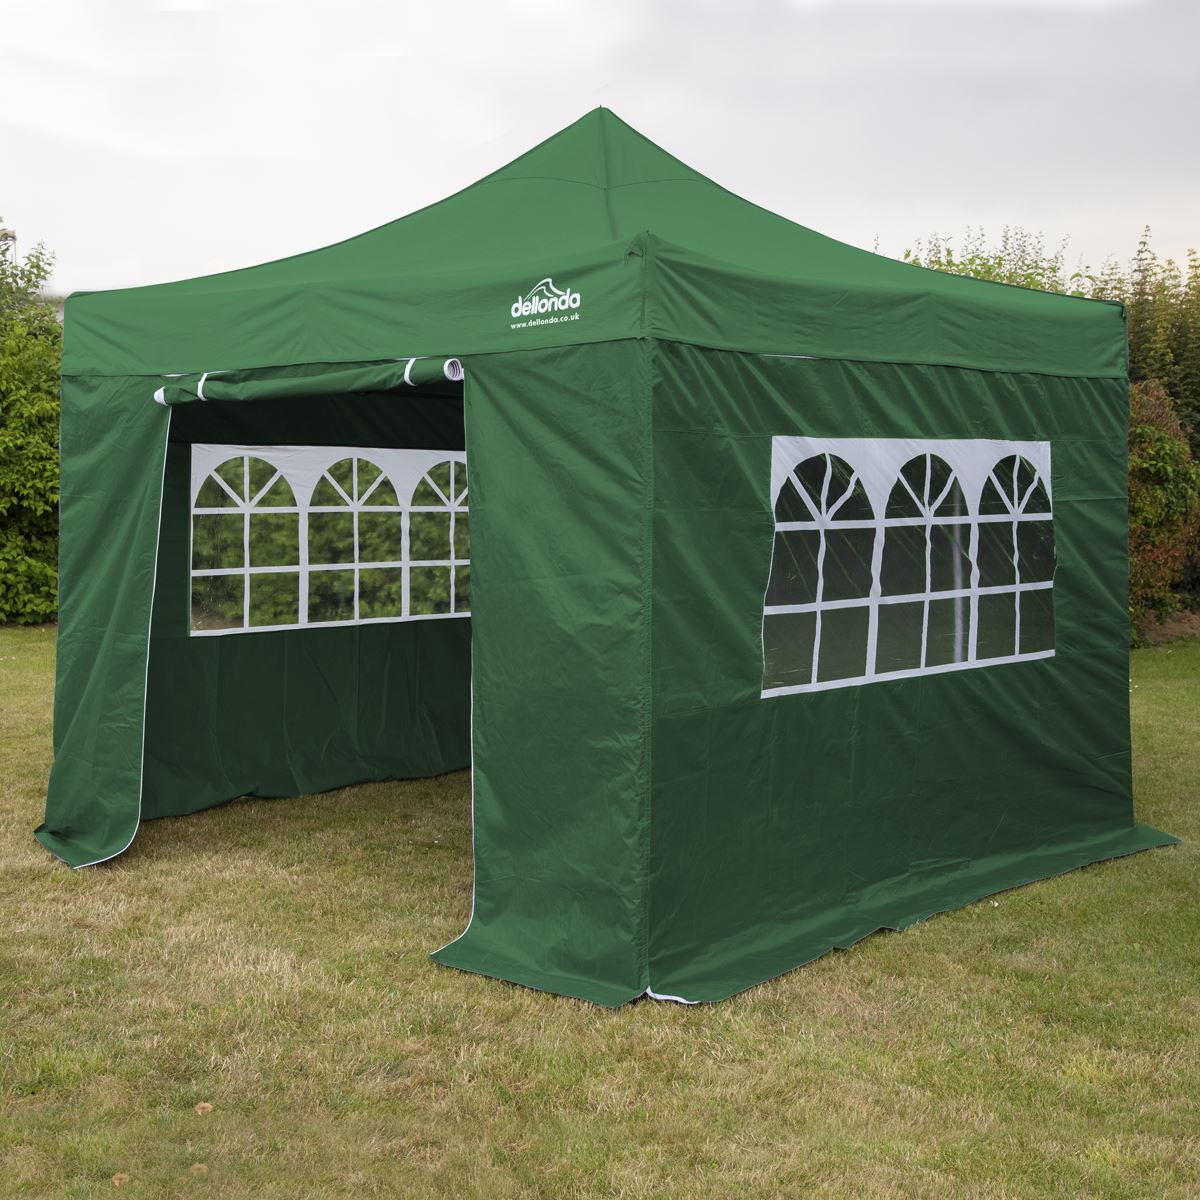 Dellonda Premium 3x3m Pop-Up Gazebo & Side Walls, PVC Coated, Water Resistant Fabric with Carry Bag, Rope, Stakes & Weight Bags - Green